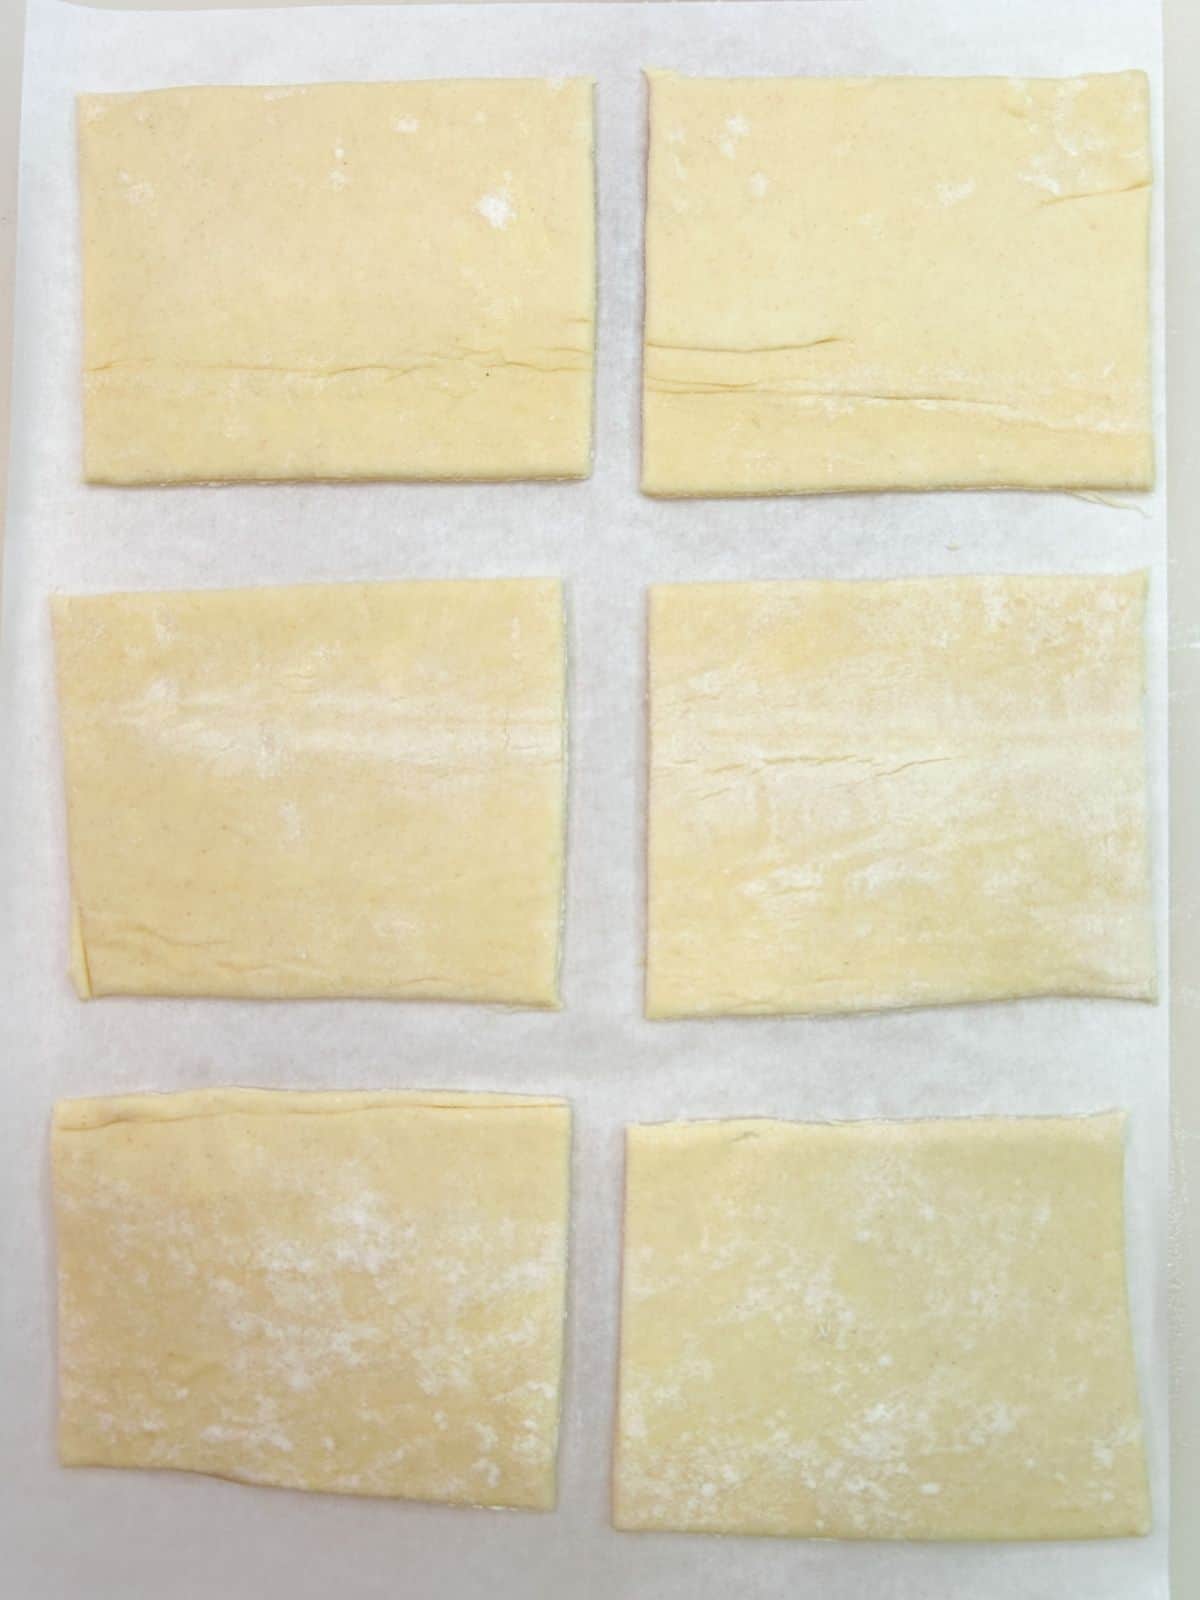 puff pastry sliced into 6 rectangles